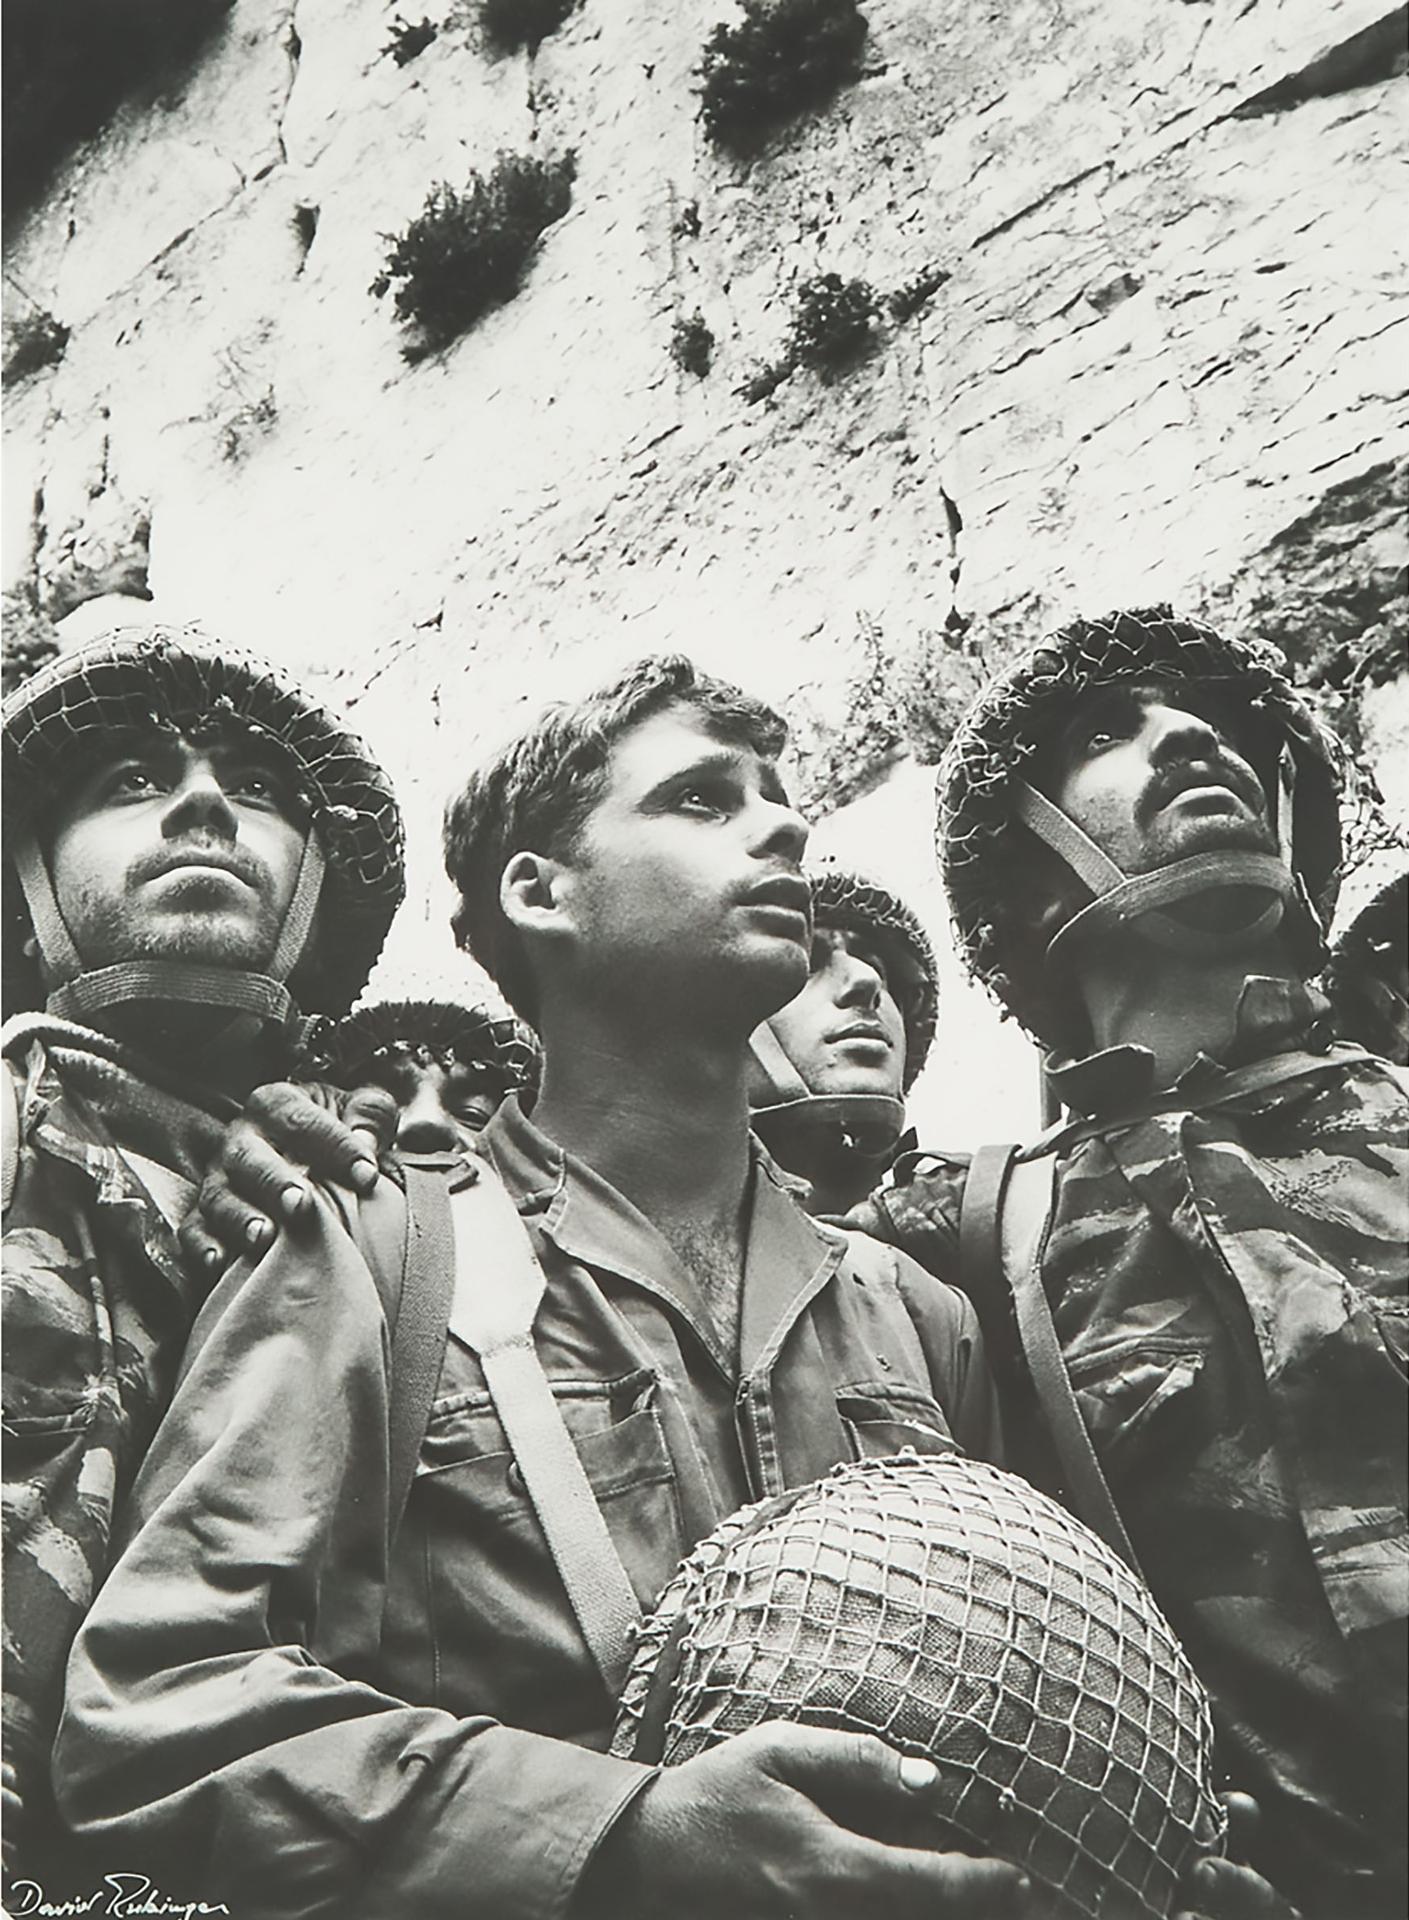 David Rubinger - The Paratroopers At The Western Wall, Circa 1967